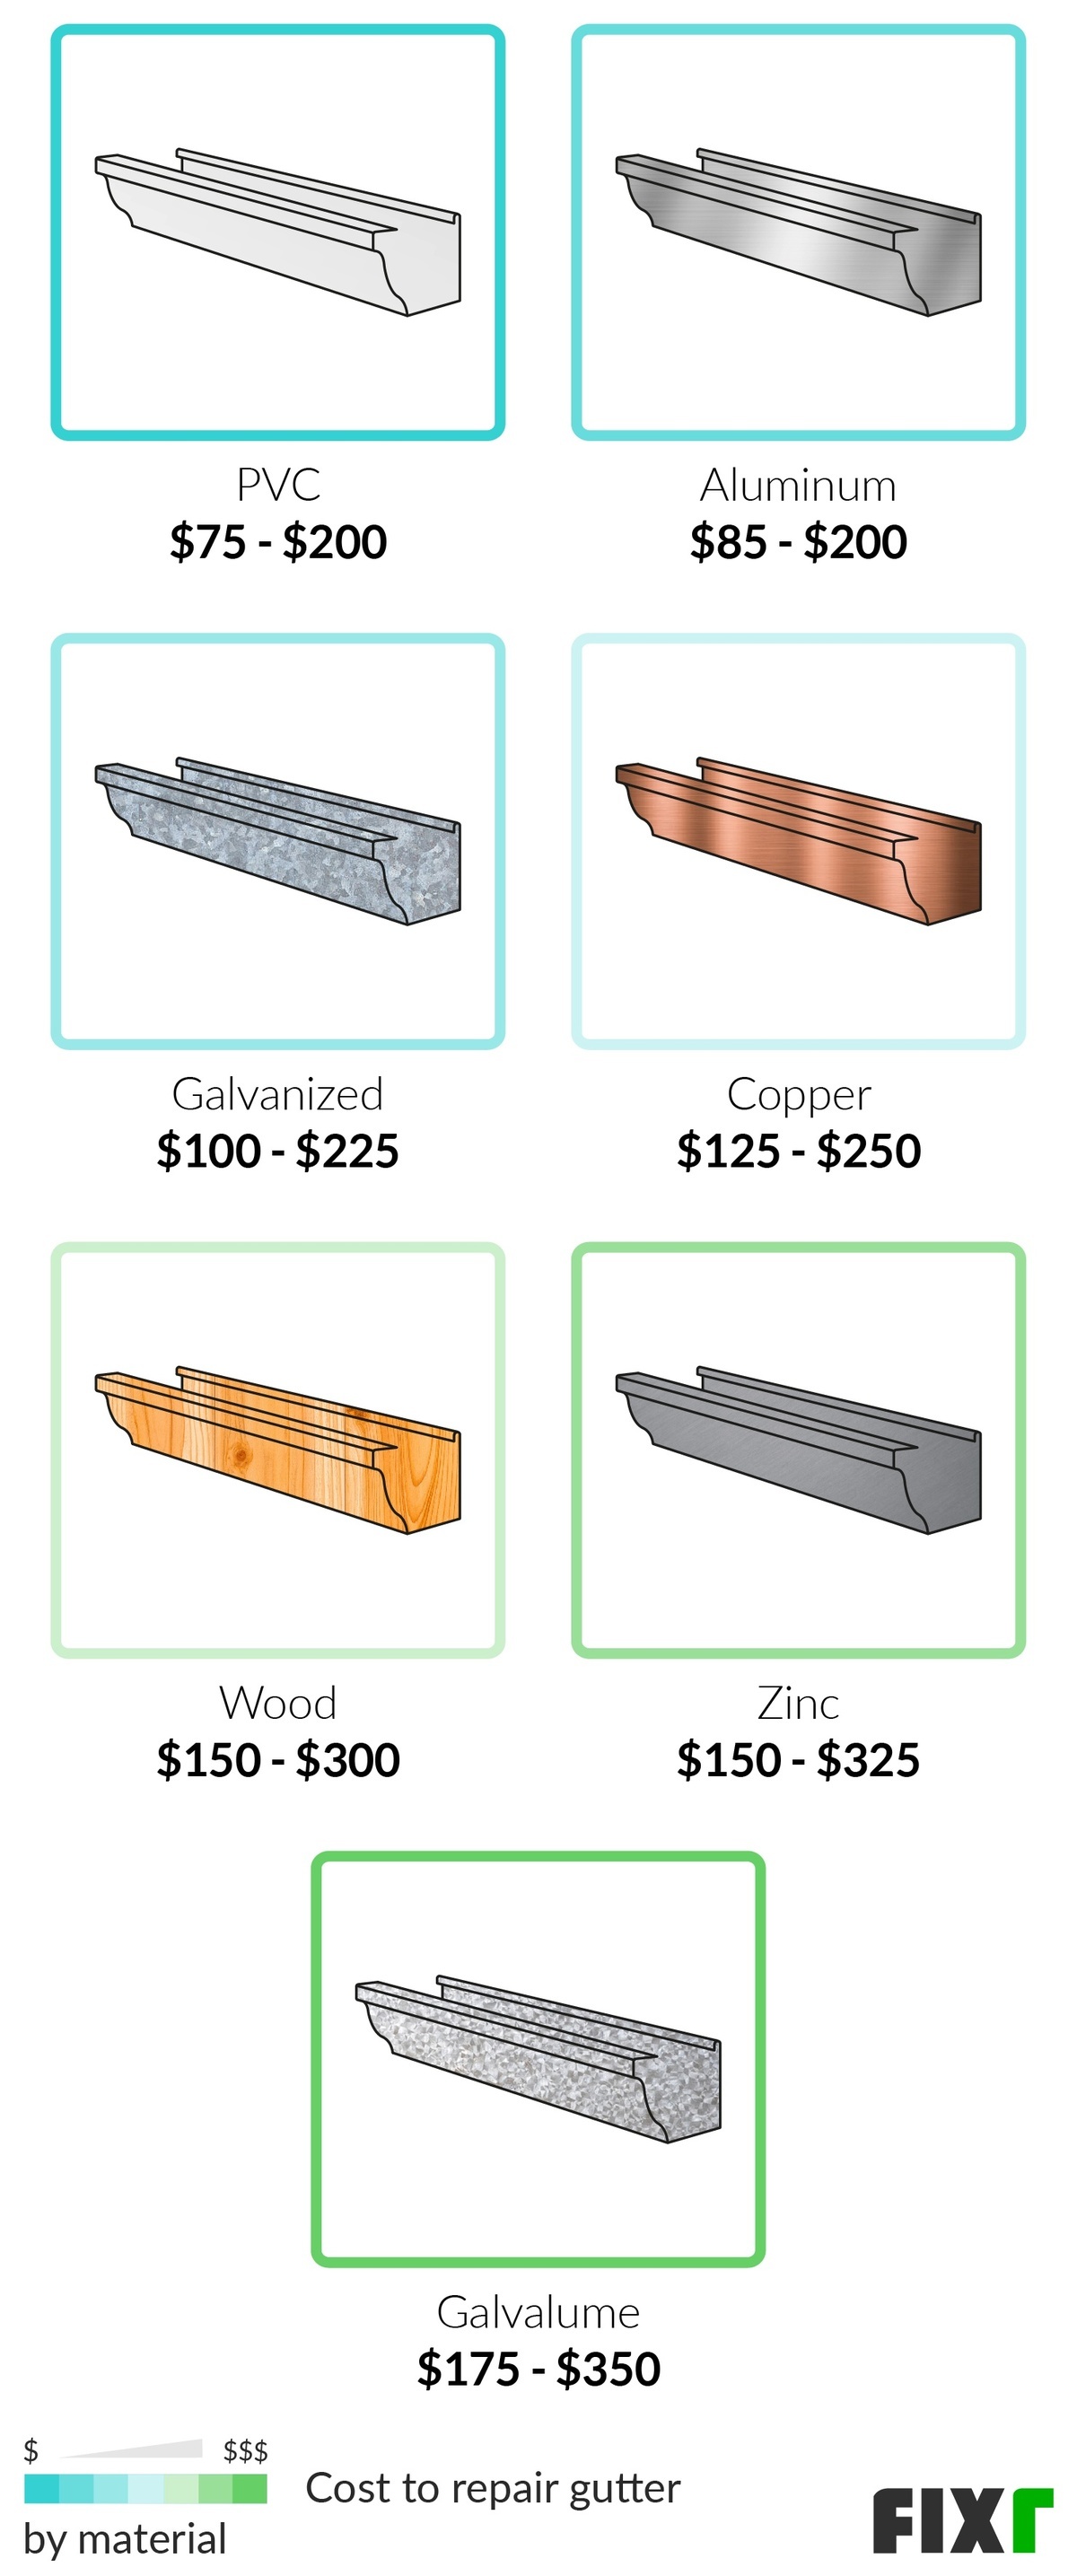 Cost to Repair a PVC, Aluminum, Galvanized, Copper, Wood, Zinc, and Galvalume Gutter